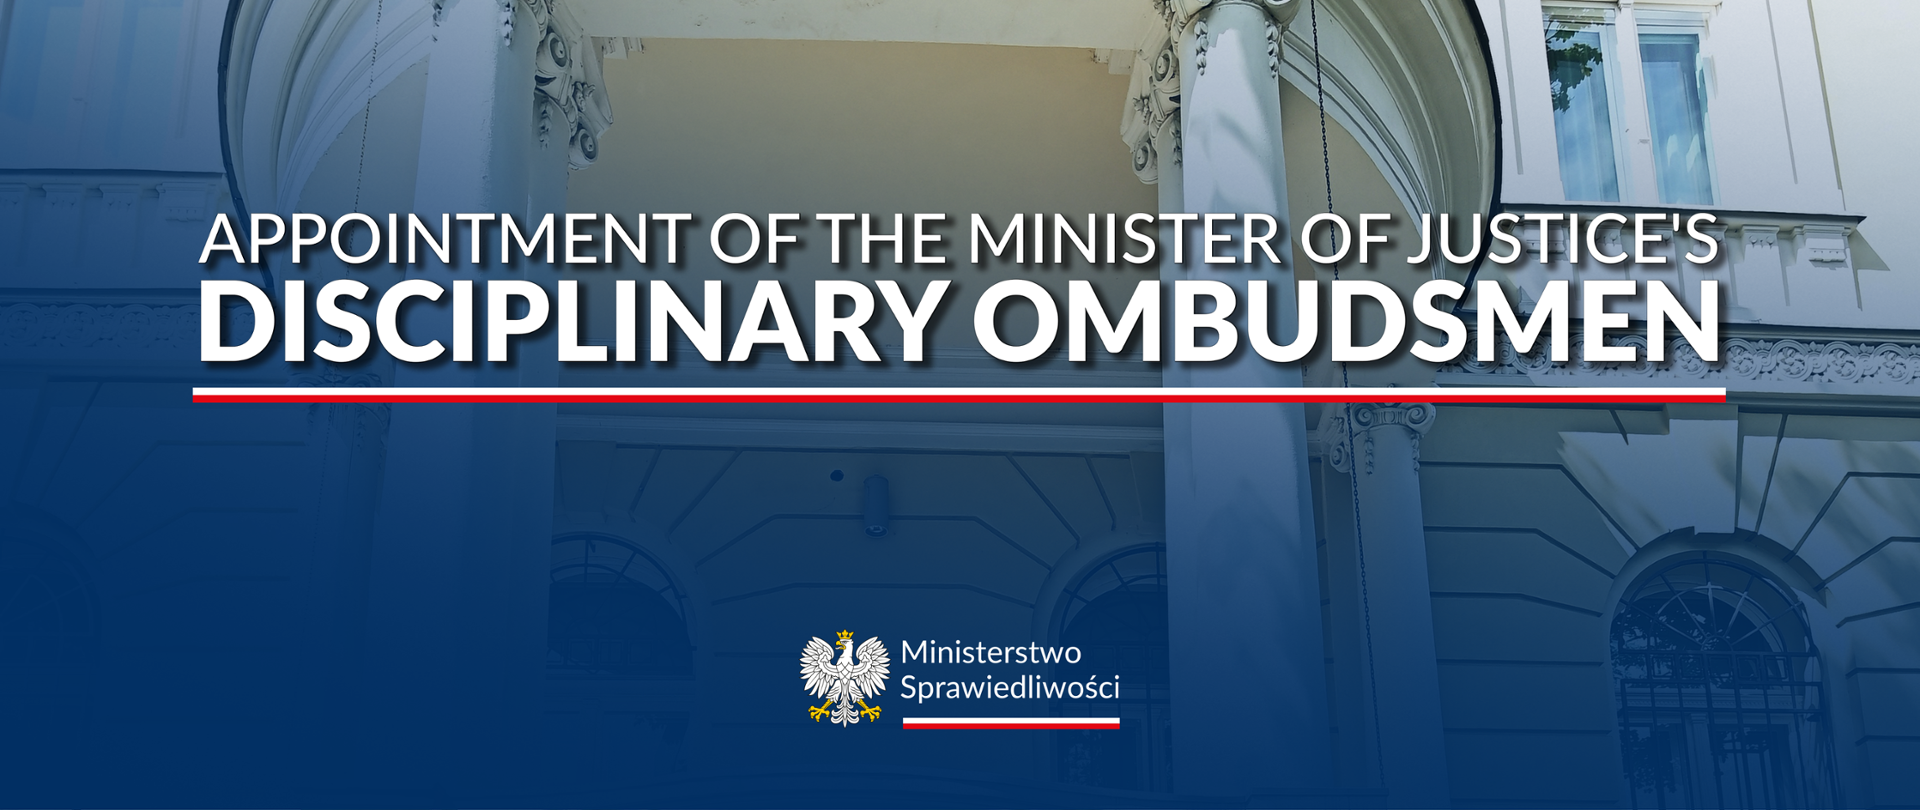 The Minister of Justice appointed Disciplinary Commissioners of the Minister of Justice